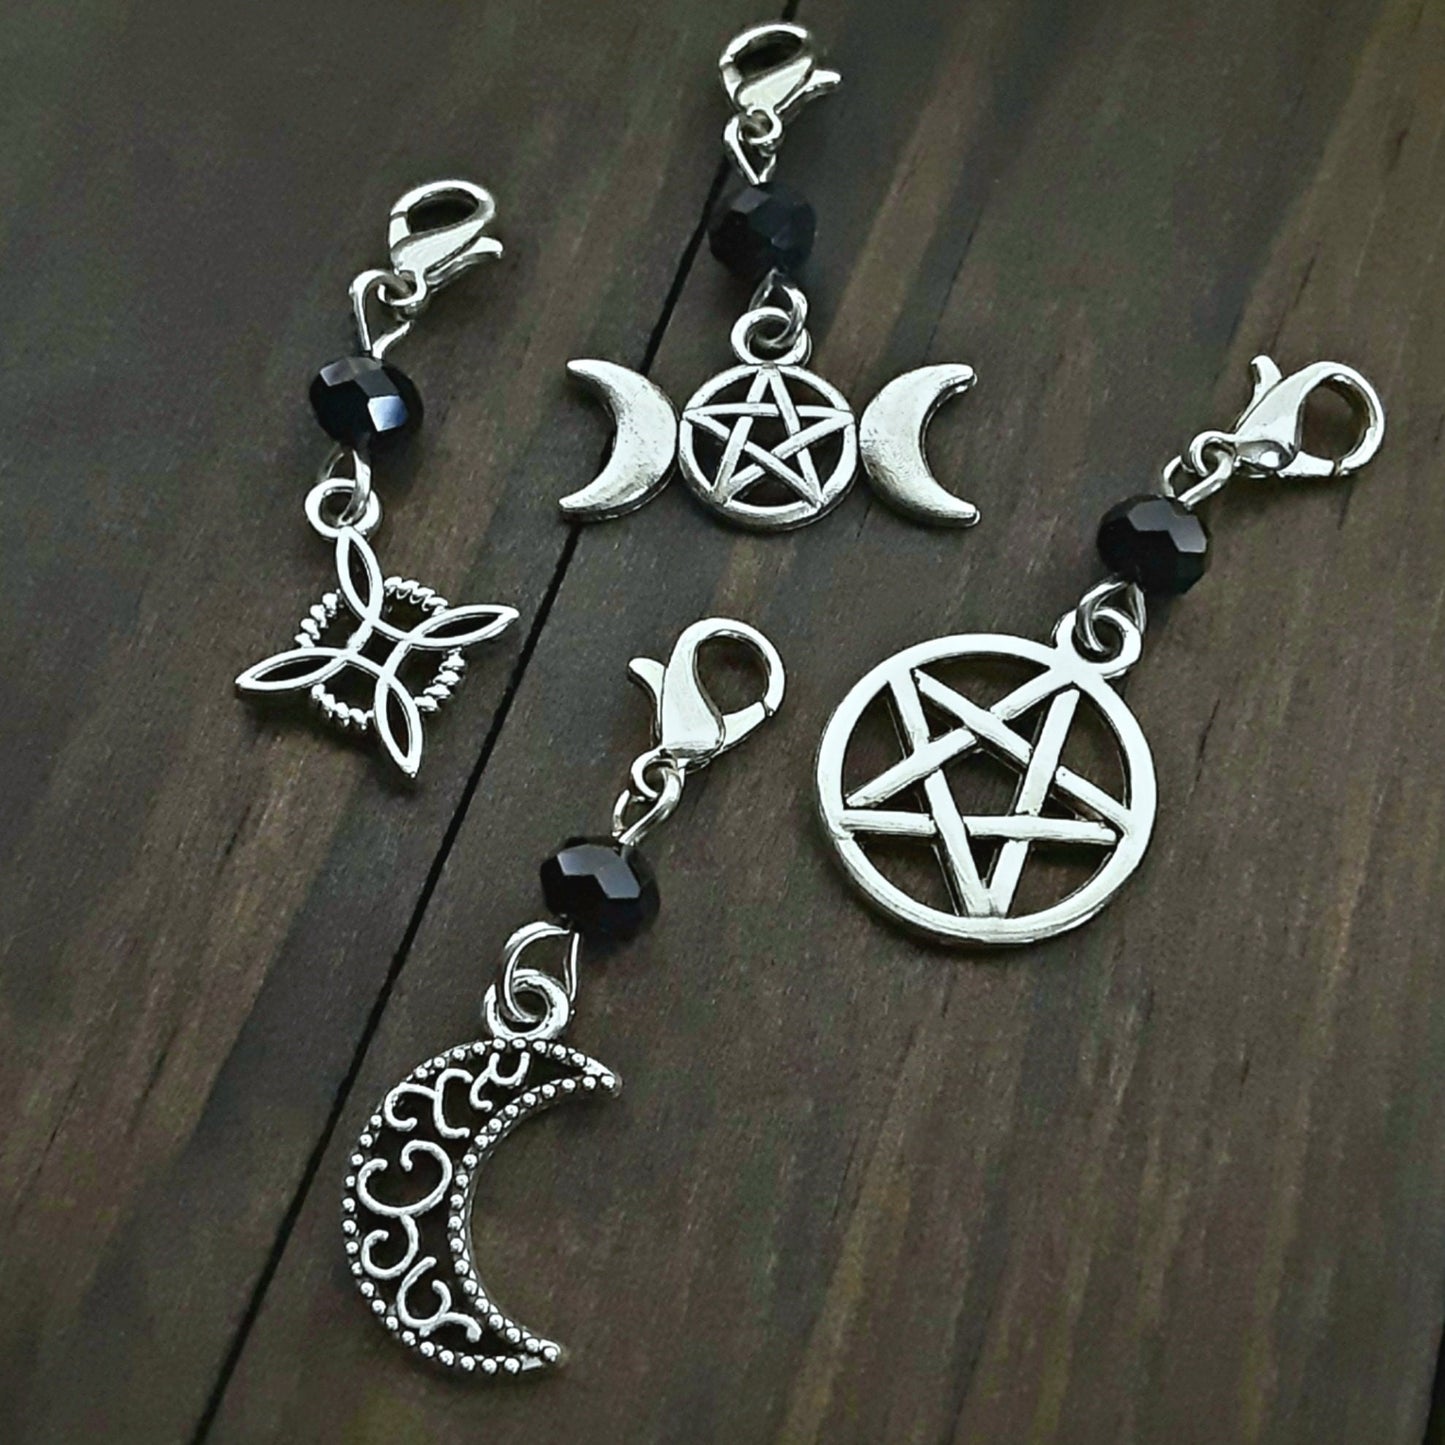 Stitch Marker Witchy 4 pc set Pagan zipper pulls Witch knot Pentacle Triple Moon Goddess and Crescent moon Gothic gift idea